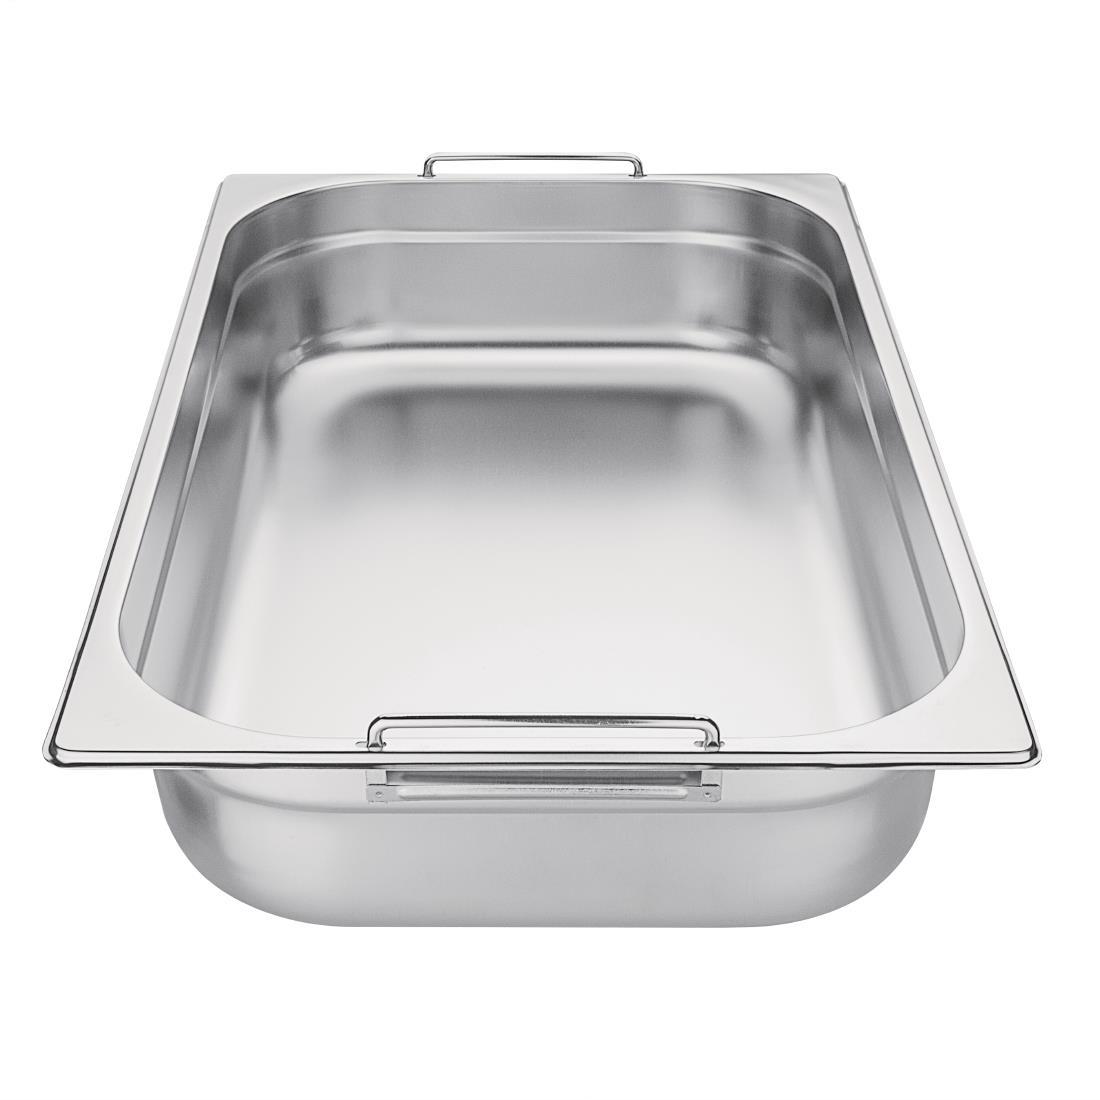 Vogue Stainless Steel 1/1 Gastronorm Pan With Handles 100mm - CB179  - 2